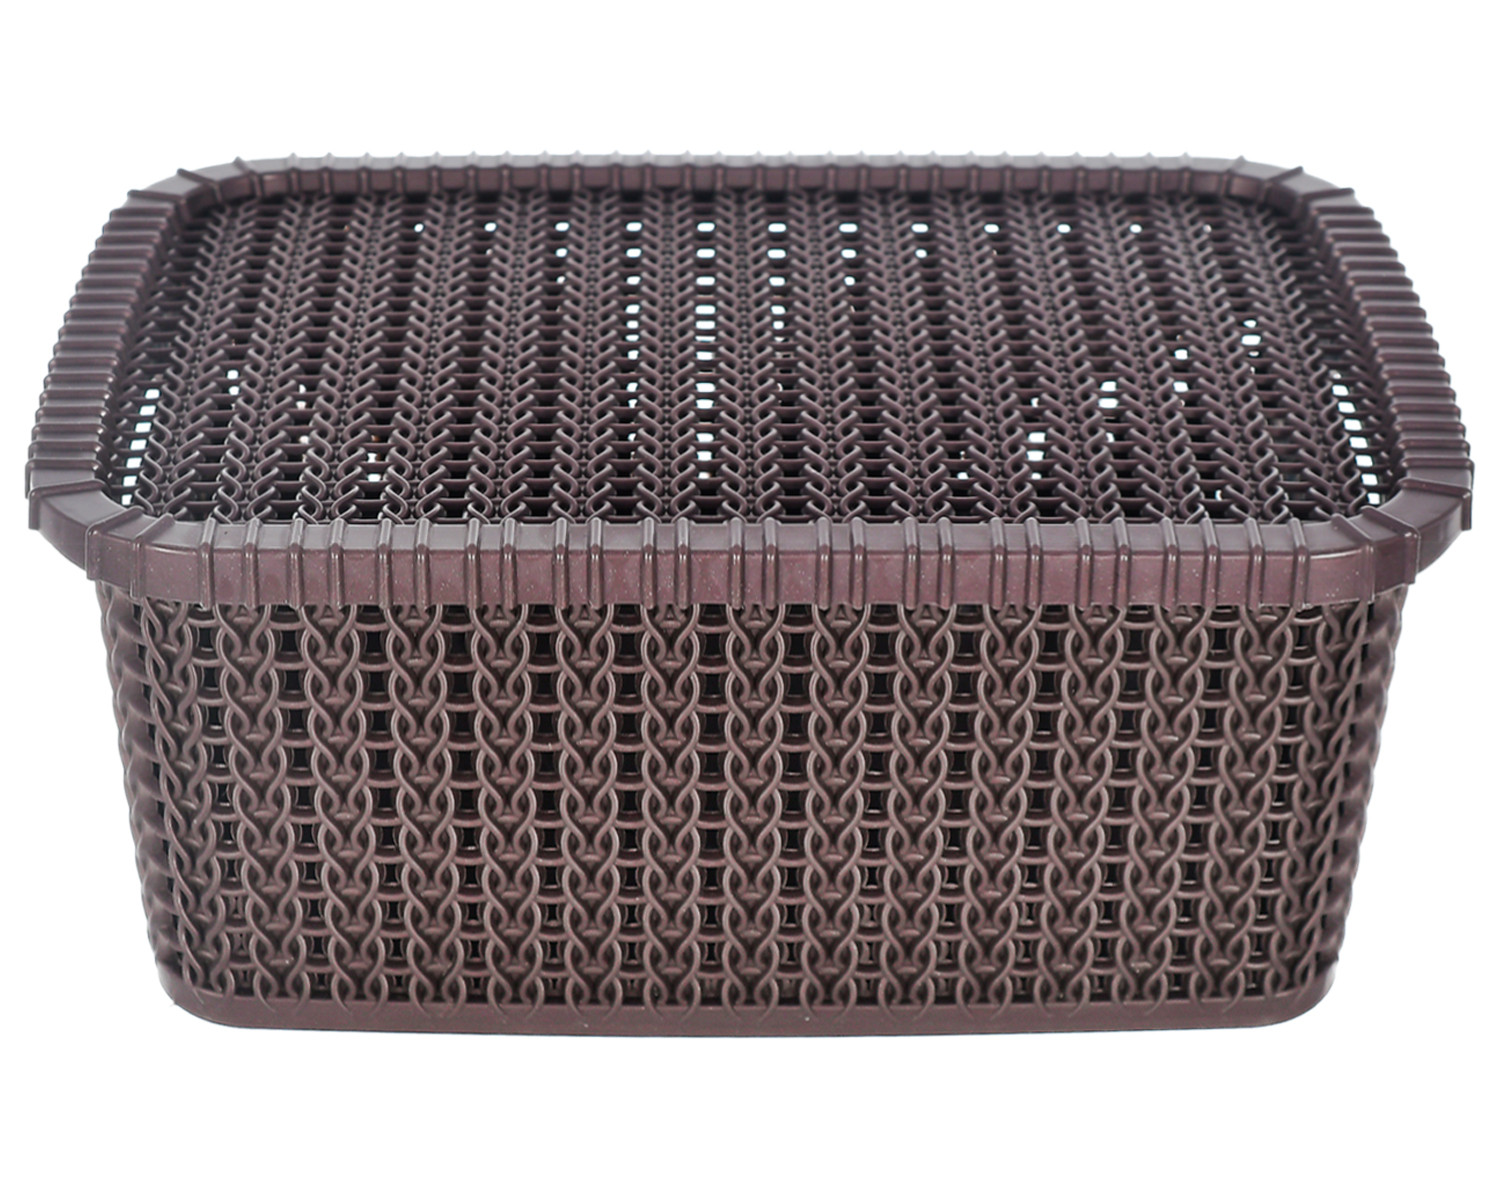 Kuber Industries Multiuses Large M 20 Plastic Basket/Organizer With Lid- Pack of 3 (Grey & Brown & Grey) -46KM081